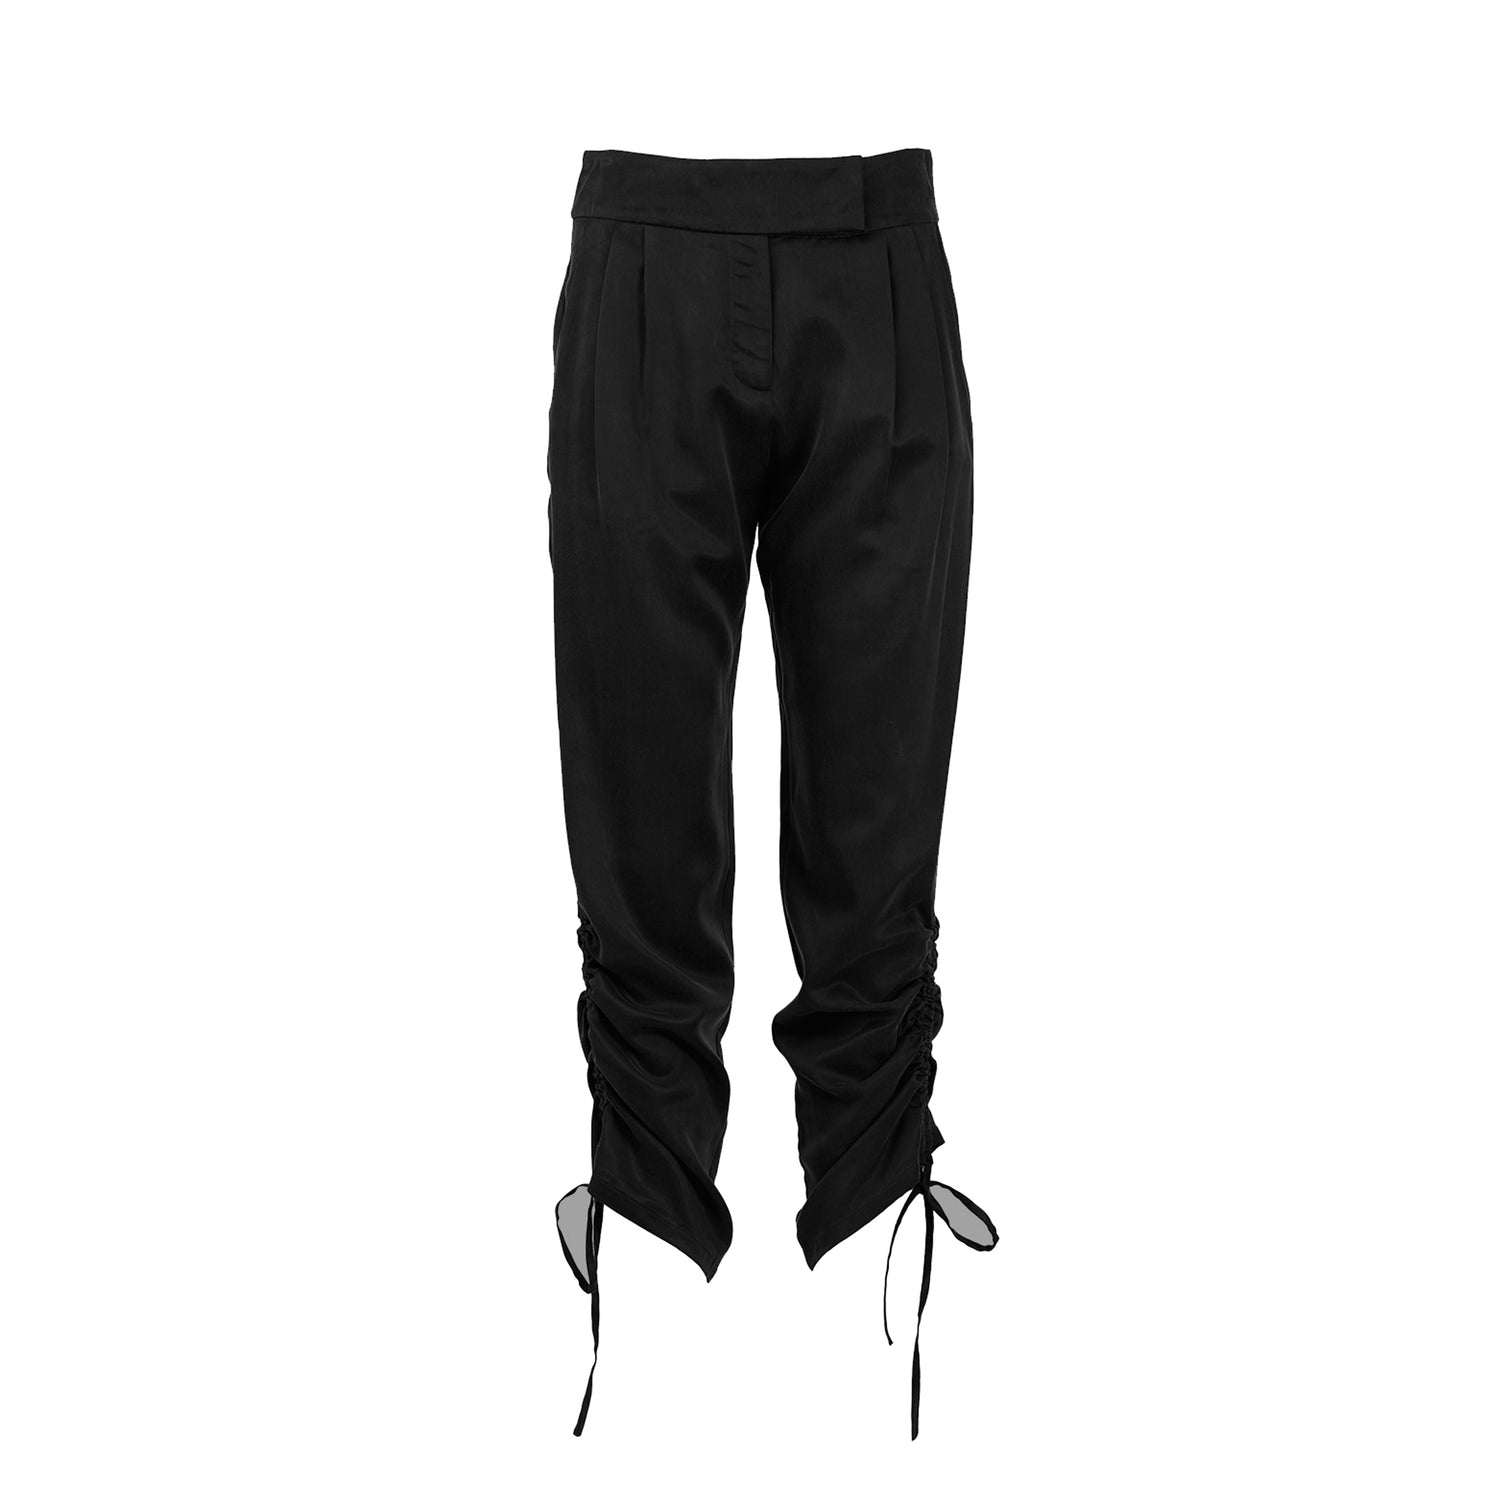 Pants with contoured waist band and side drawstring detail in Black